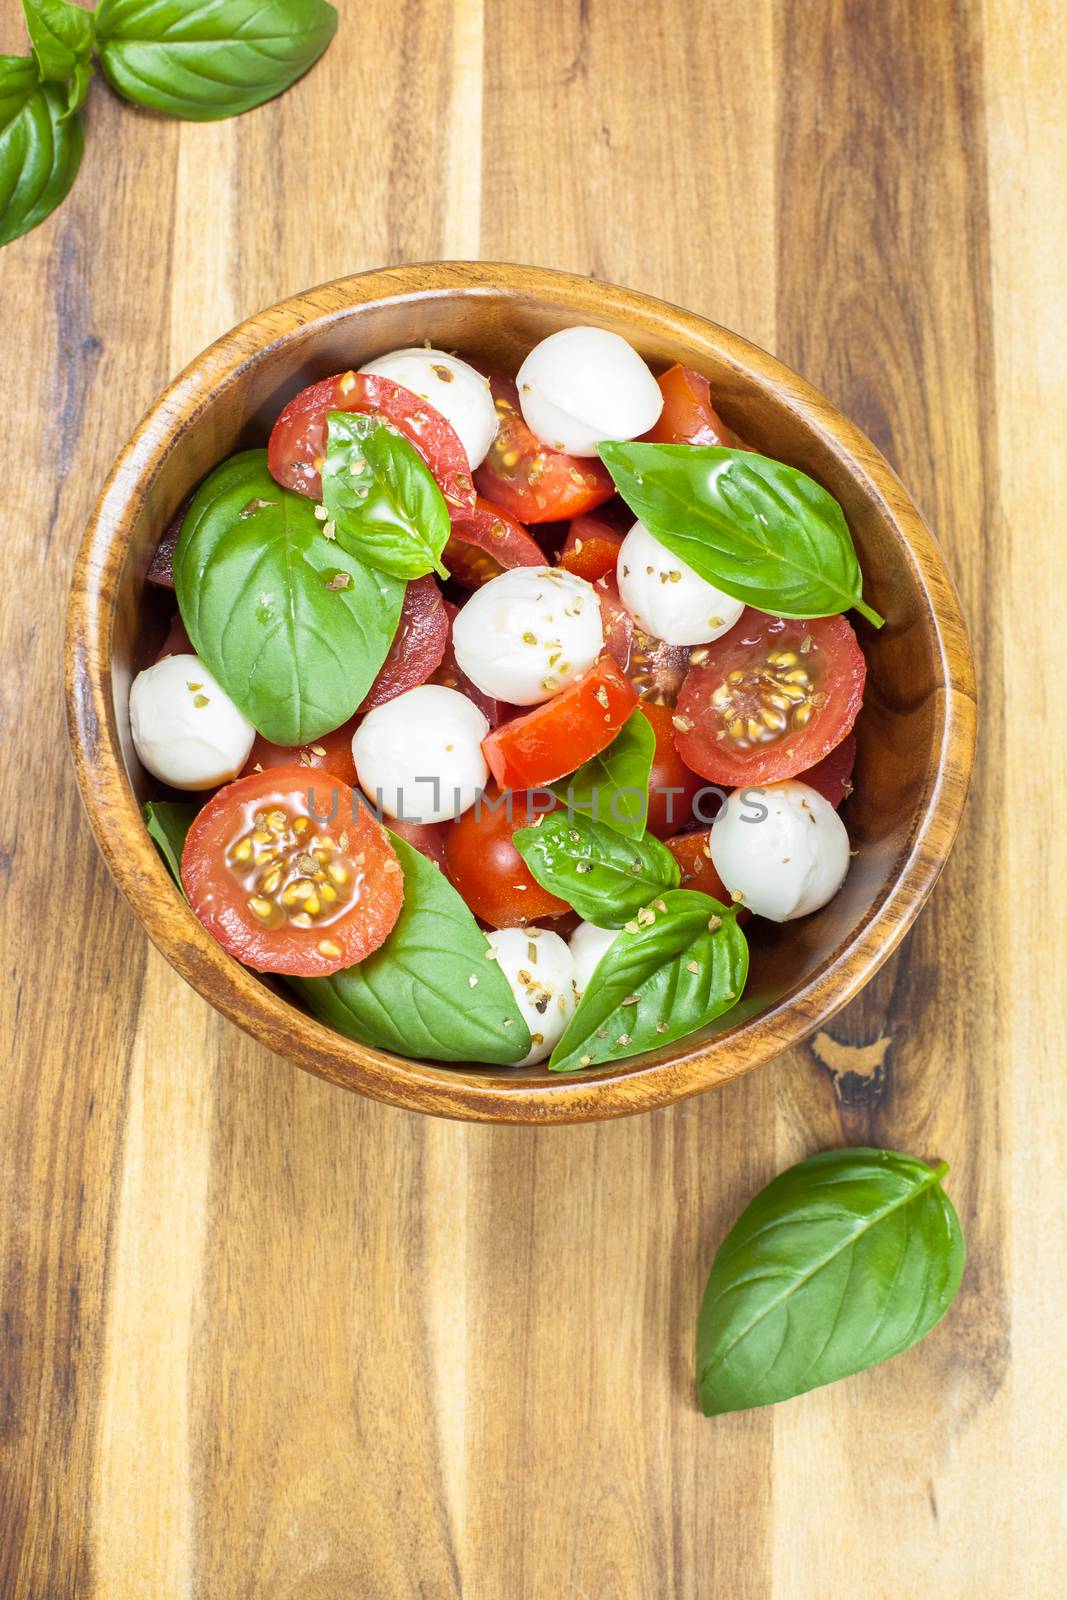 Caprese salad. Viewed from above